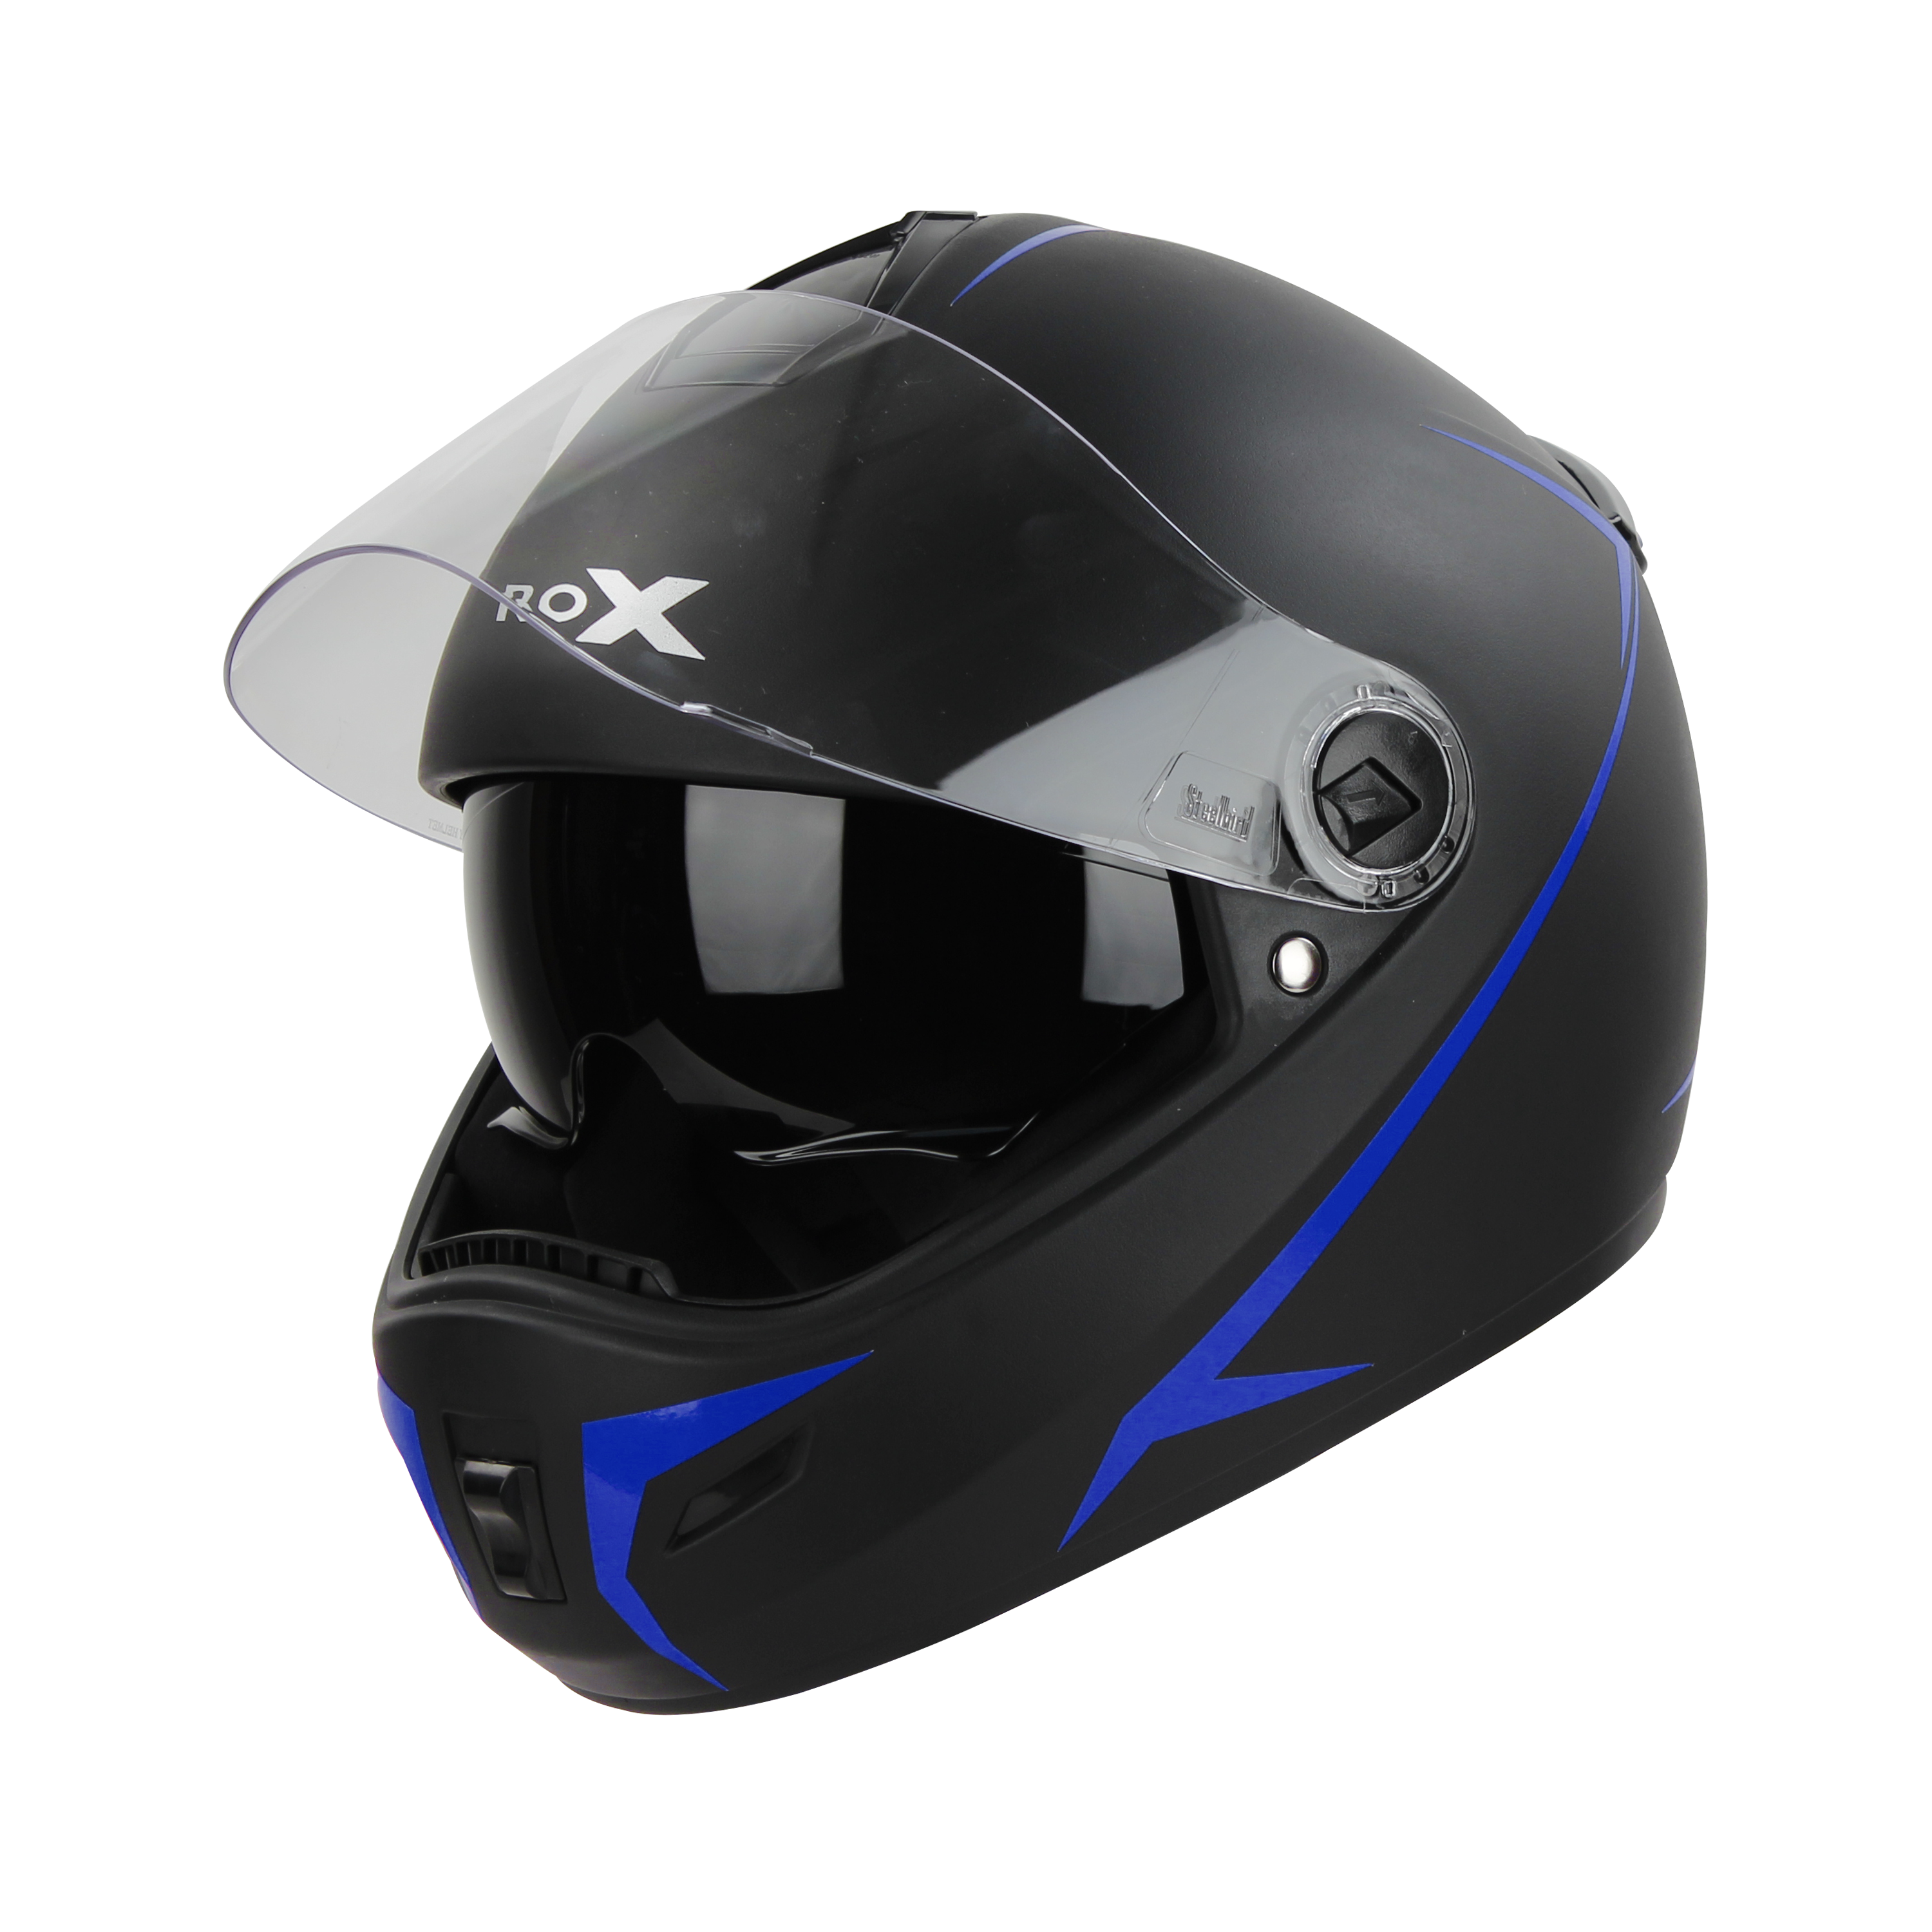 SBH-34 ROX REFLECTIVE GLOSSY BLACK WITH BLUE (WITH INNER SUN SHIELD)